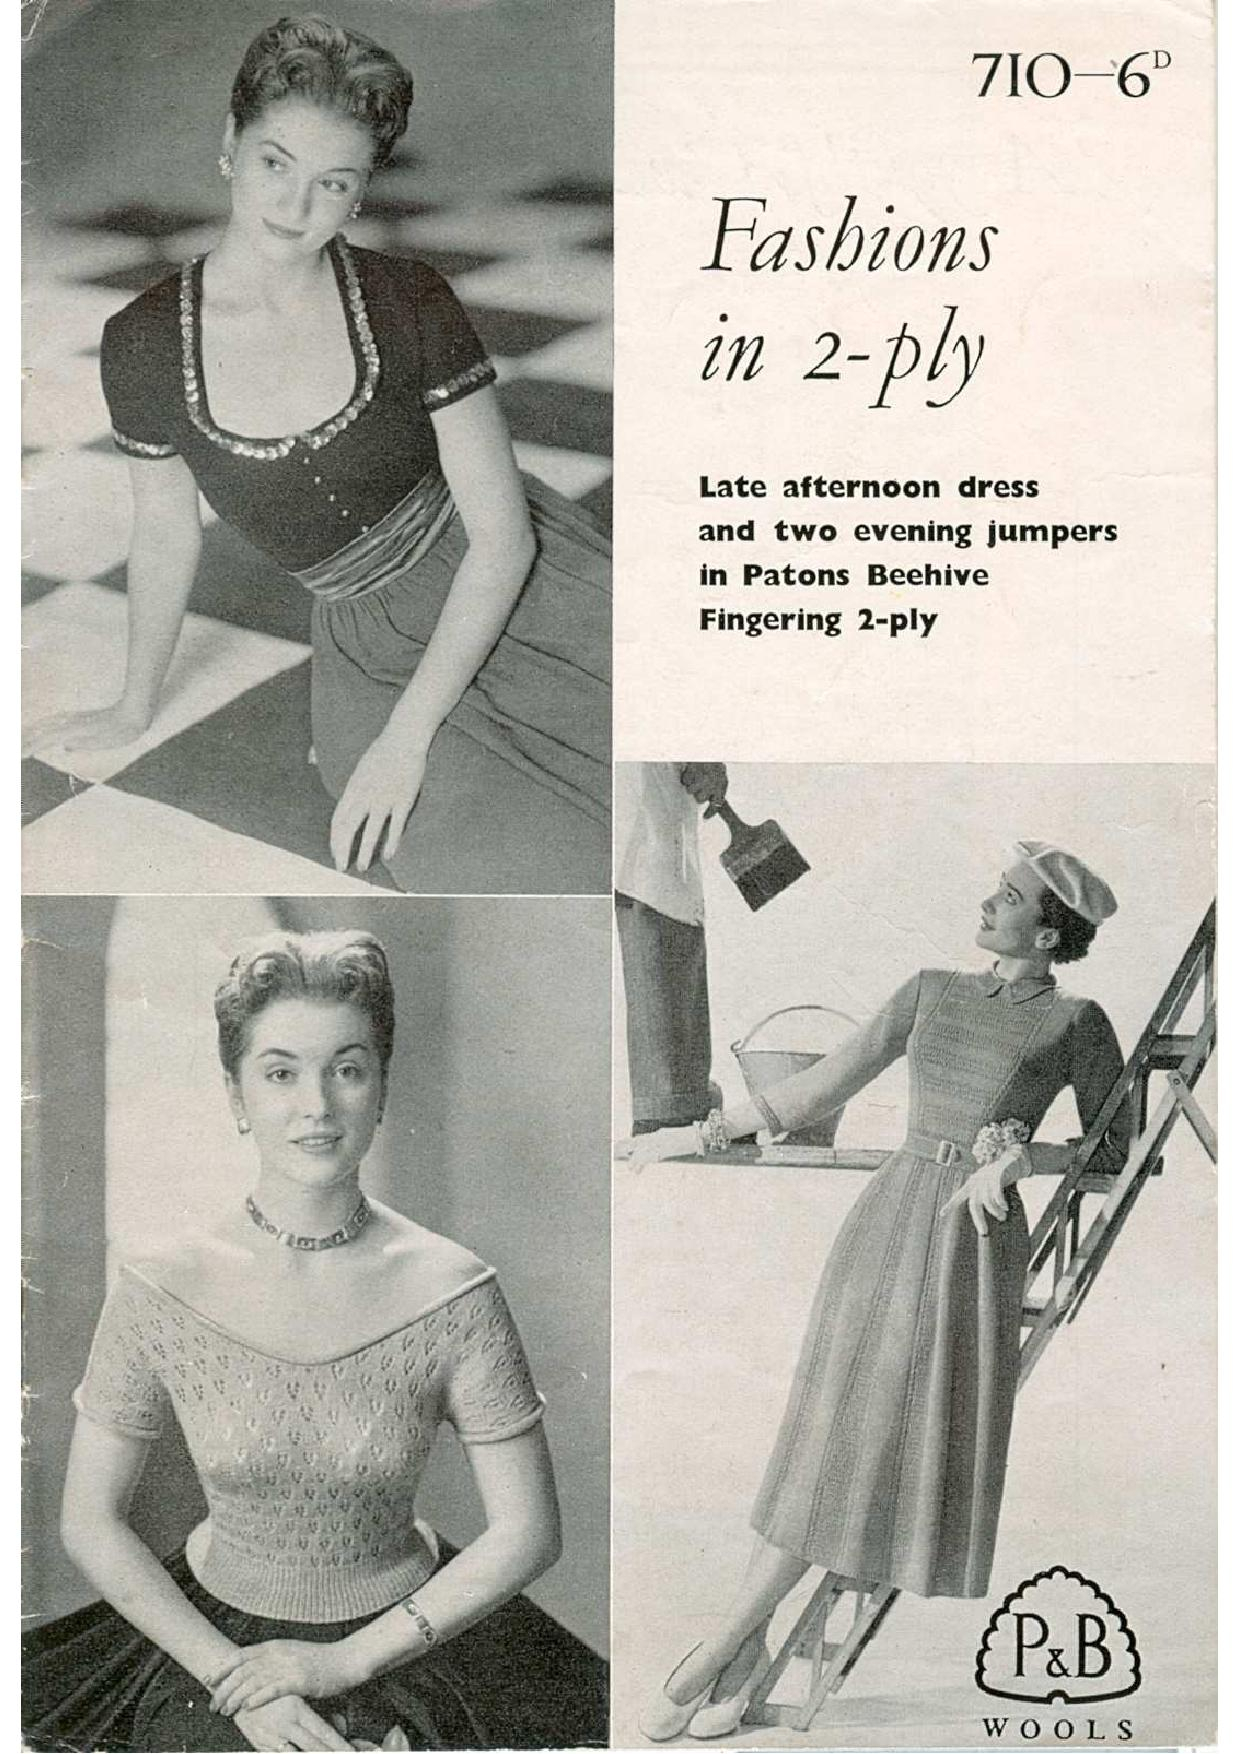 Fashionable Knitting Patterns Uk Pdf Vintage Knitting Pattern Patons 710 Ladies Afternoon Dress With Two Sweaters Jumpers